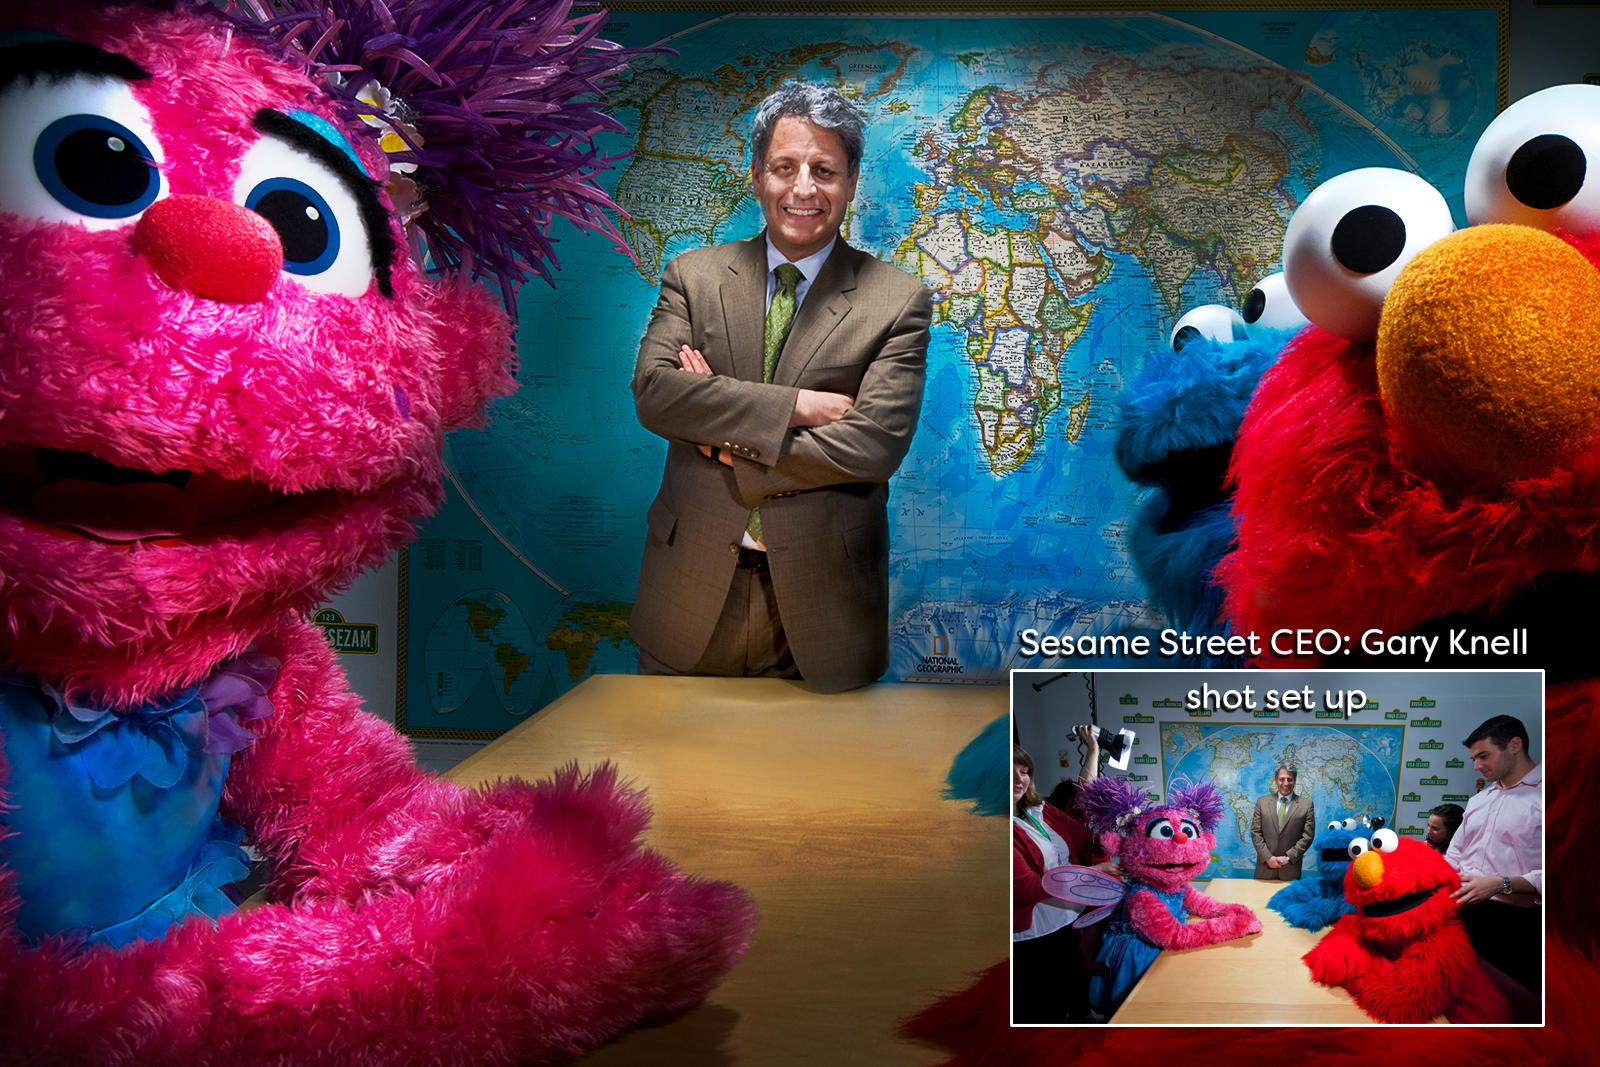 Gary Nell CEO of Sesame Street photographed with characters from the children's television for an article on their worldwide marketing. : Portraits-Keywording : New York City based photographer and video specializing in portrait corporate portraits, video, editorial stories for on location and architectural photography